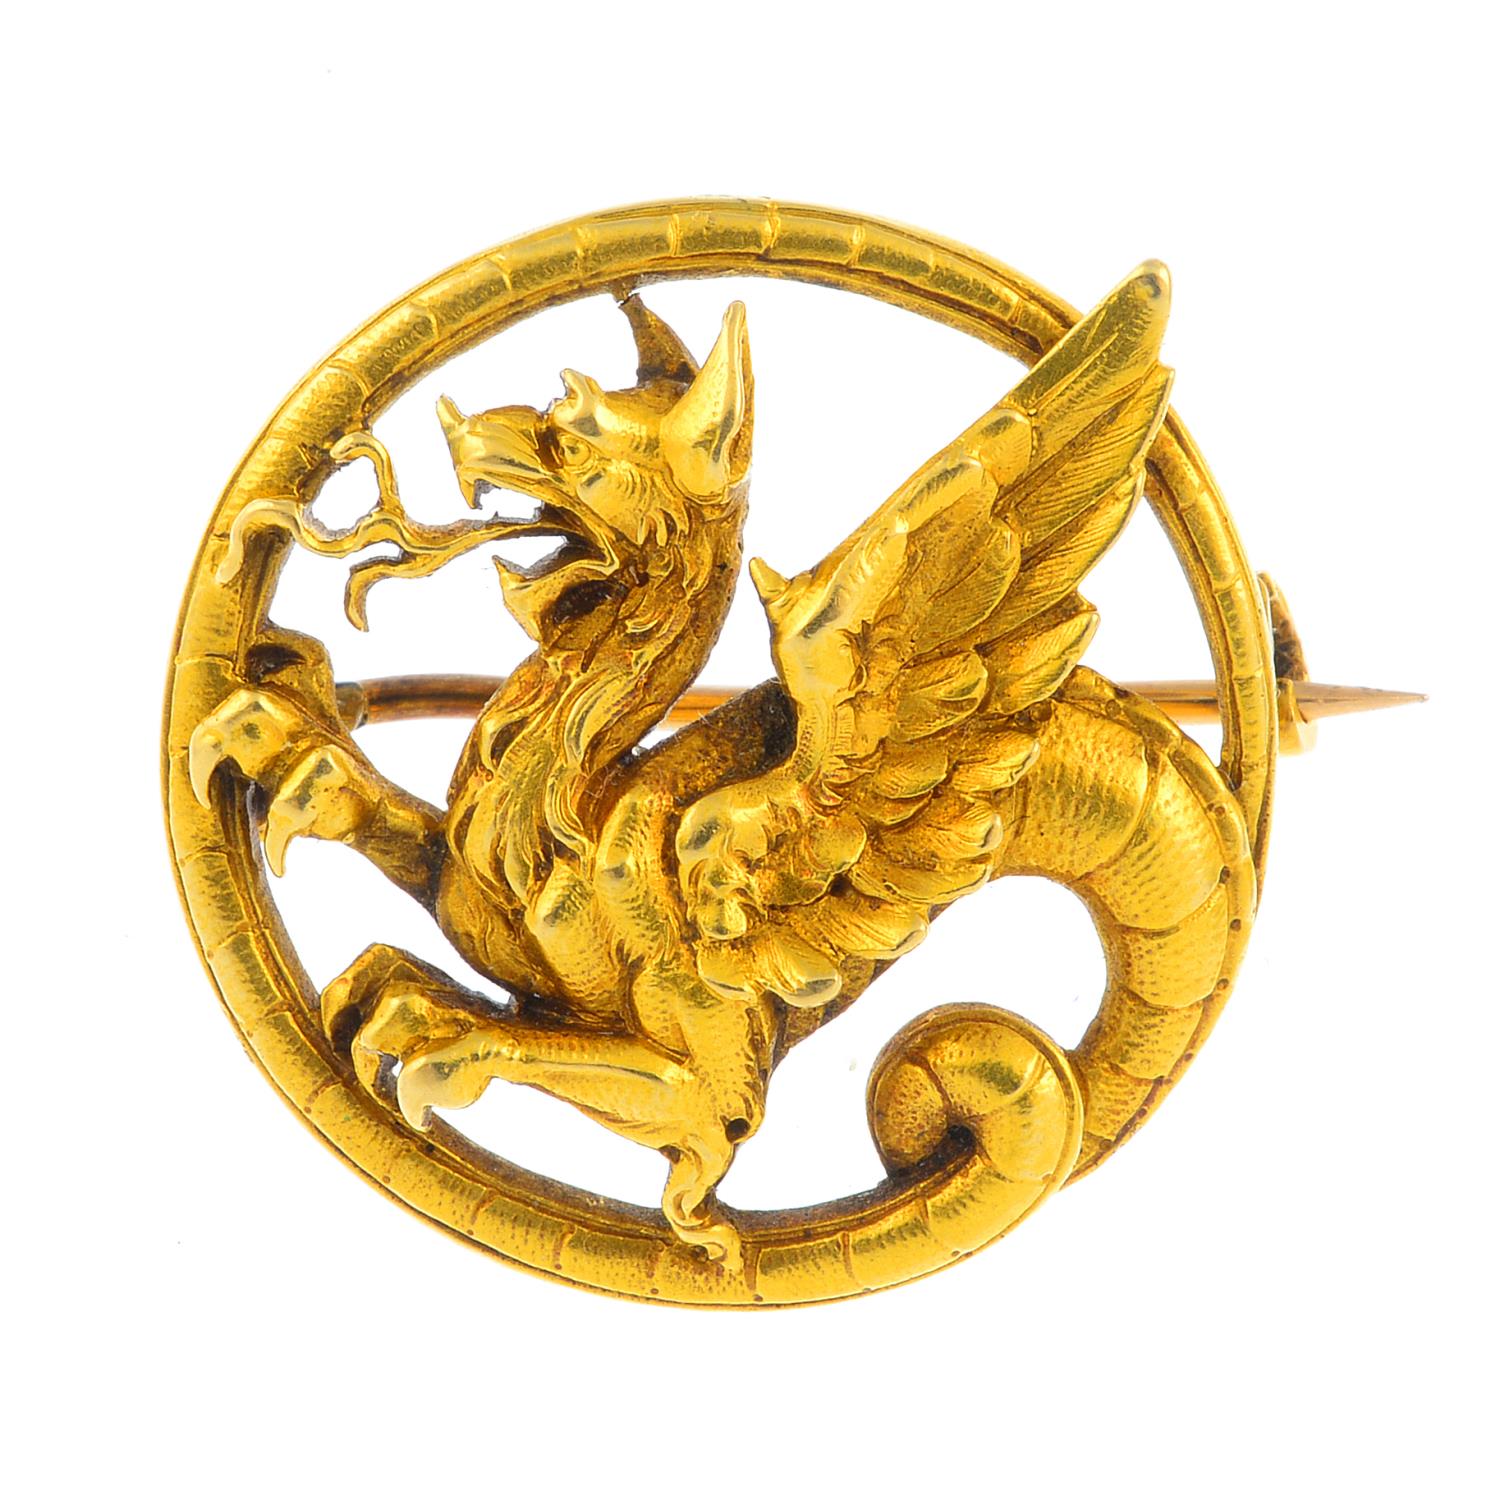 A mid Victorian gold brooch, circa 1870. Designed as a textured chimera, its scrolling tail